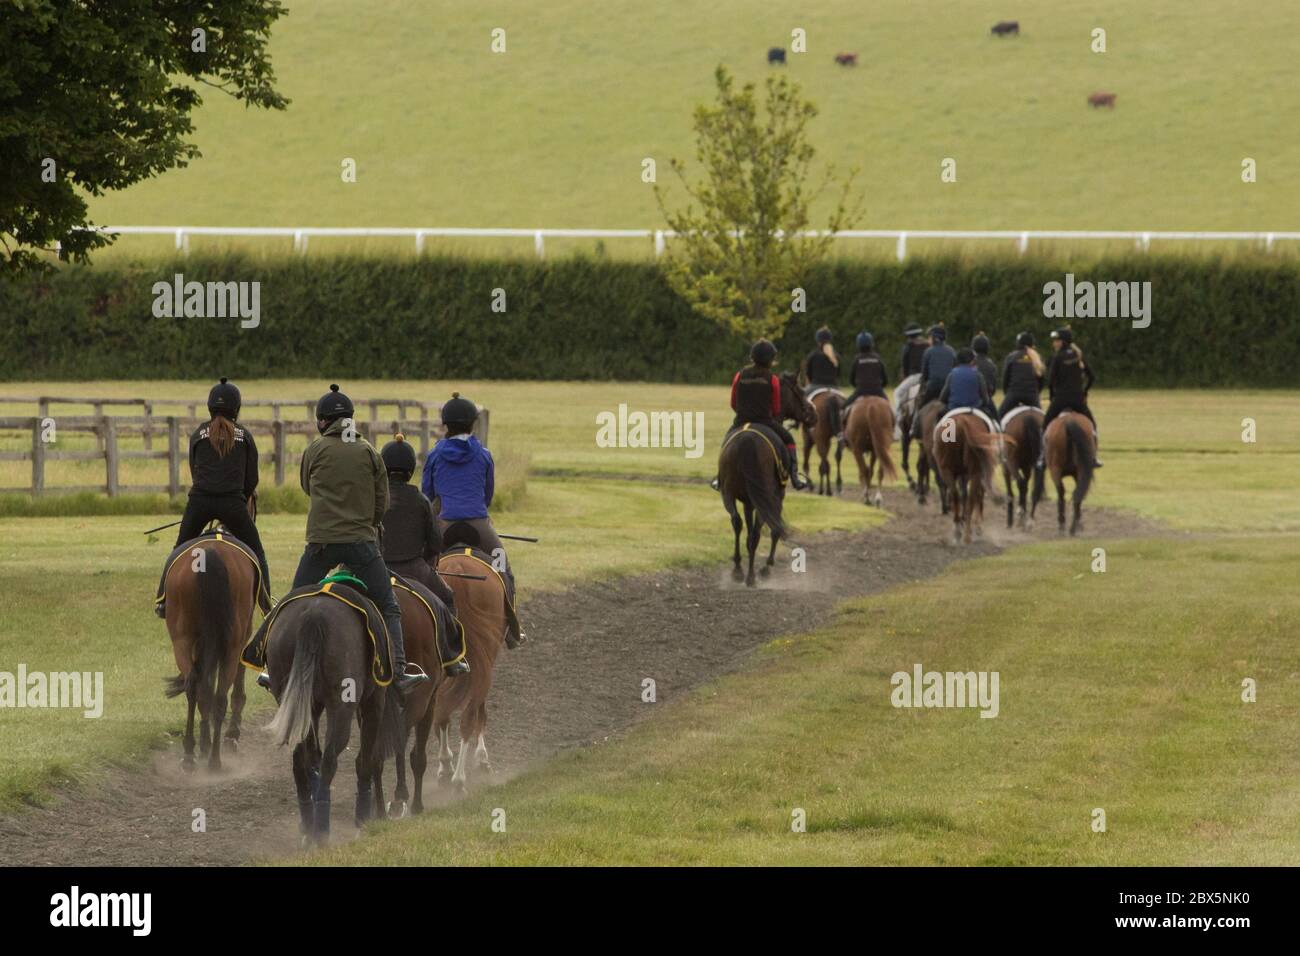 Kingsclere, Hampshire. 5th June, 2020. Riders and their horses head out to the gallops, at the Kingsclere Park House Stables, which are run by horse racing trainer Andrew Balding, in Hampshire, Britain on June 5, 2020. Horse racing behind closed doors has resumed gradually in Britain after the government eased some lockdown restrictions. Racing is taking place behind closed doors with strict measures taken to prevent the spread of coronavirus. Credit: Tim Ireland/Xinhua/Alamy Live News Stock Photo